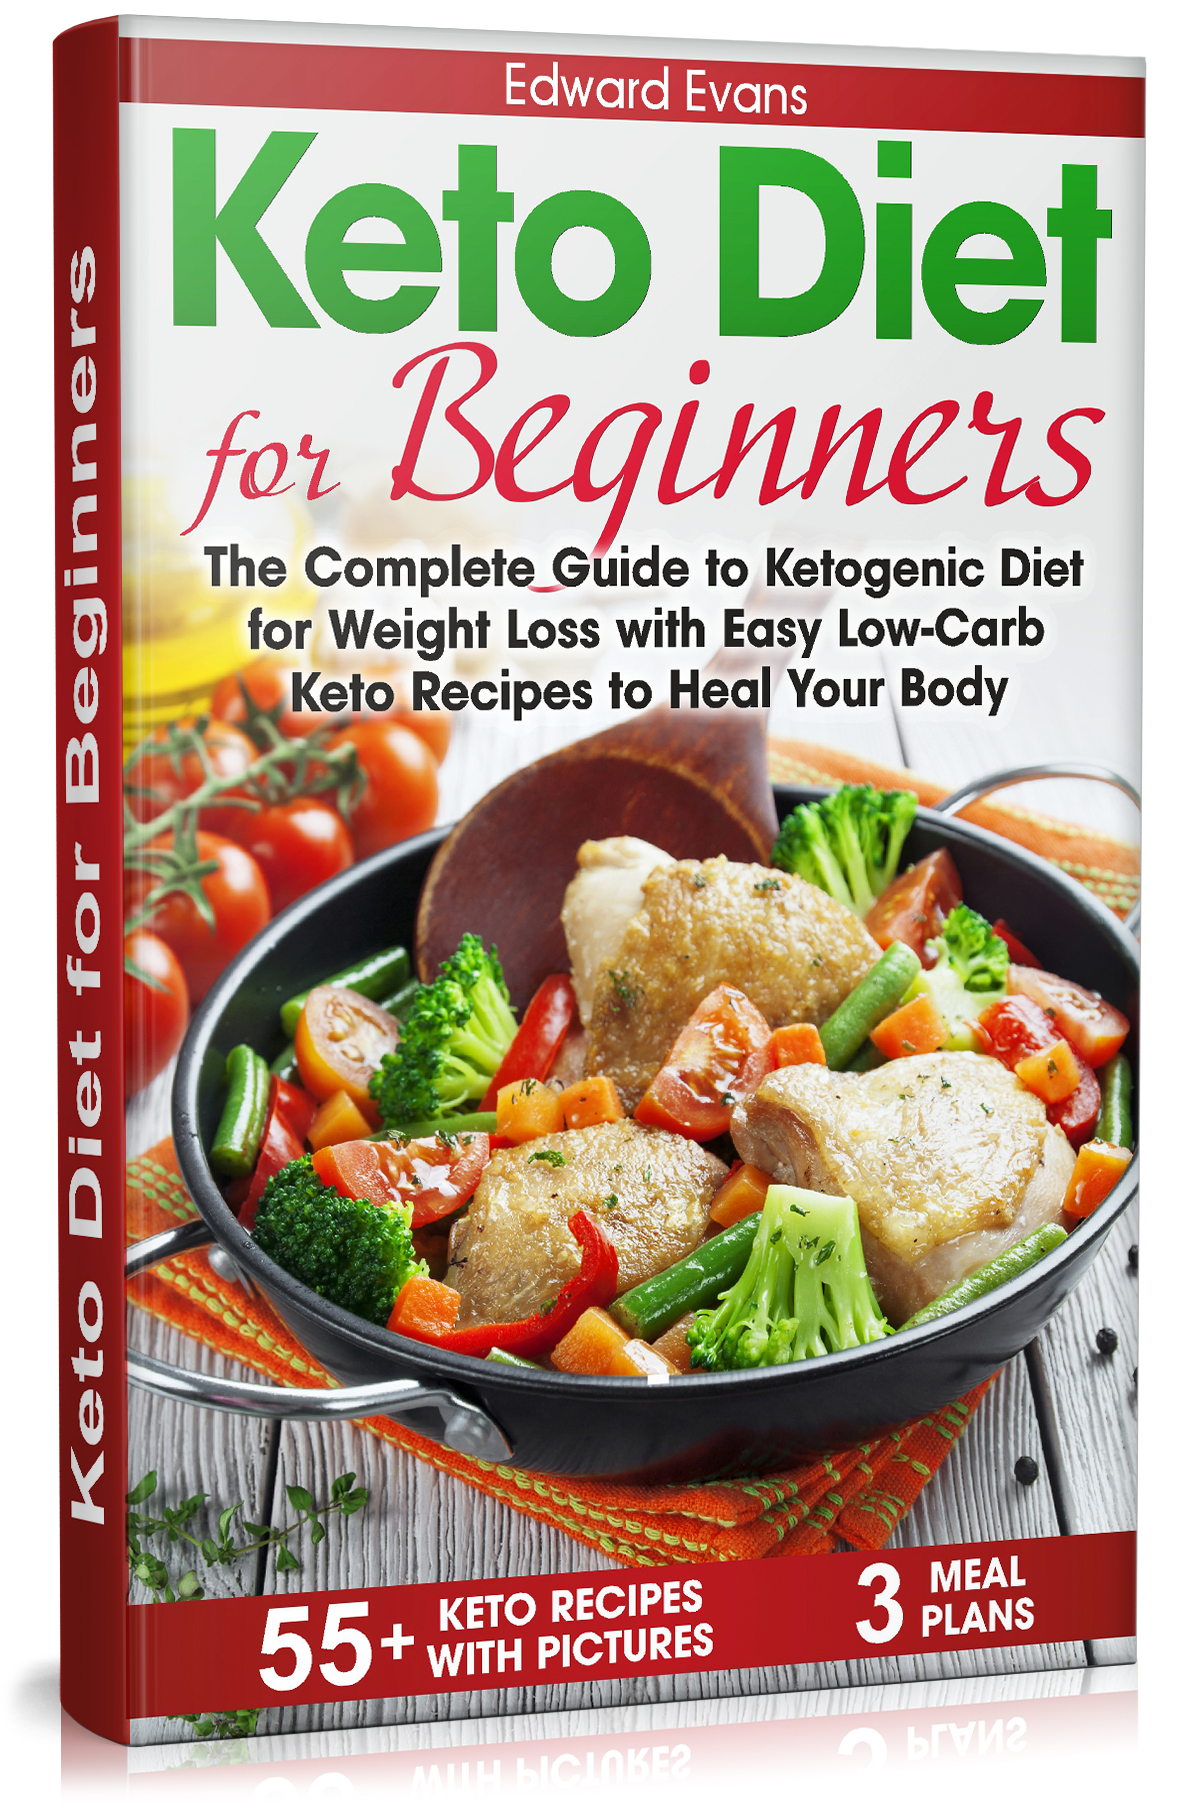 FREE: Keto Diet for Beginners: The Complete Guide to Ketogenic Diet for Weight Loss with Easy Low-Carb Recipes to Heal Your Body by Edward Evans